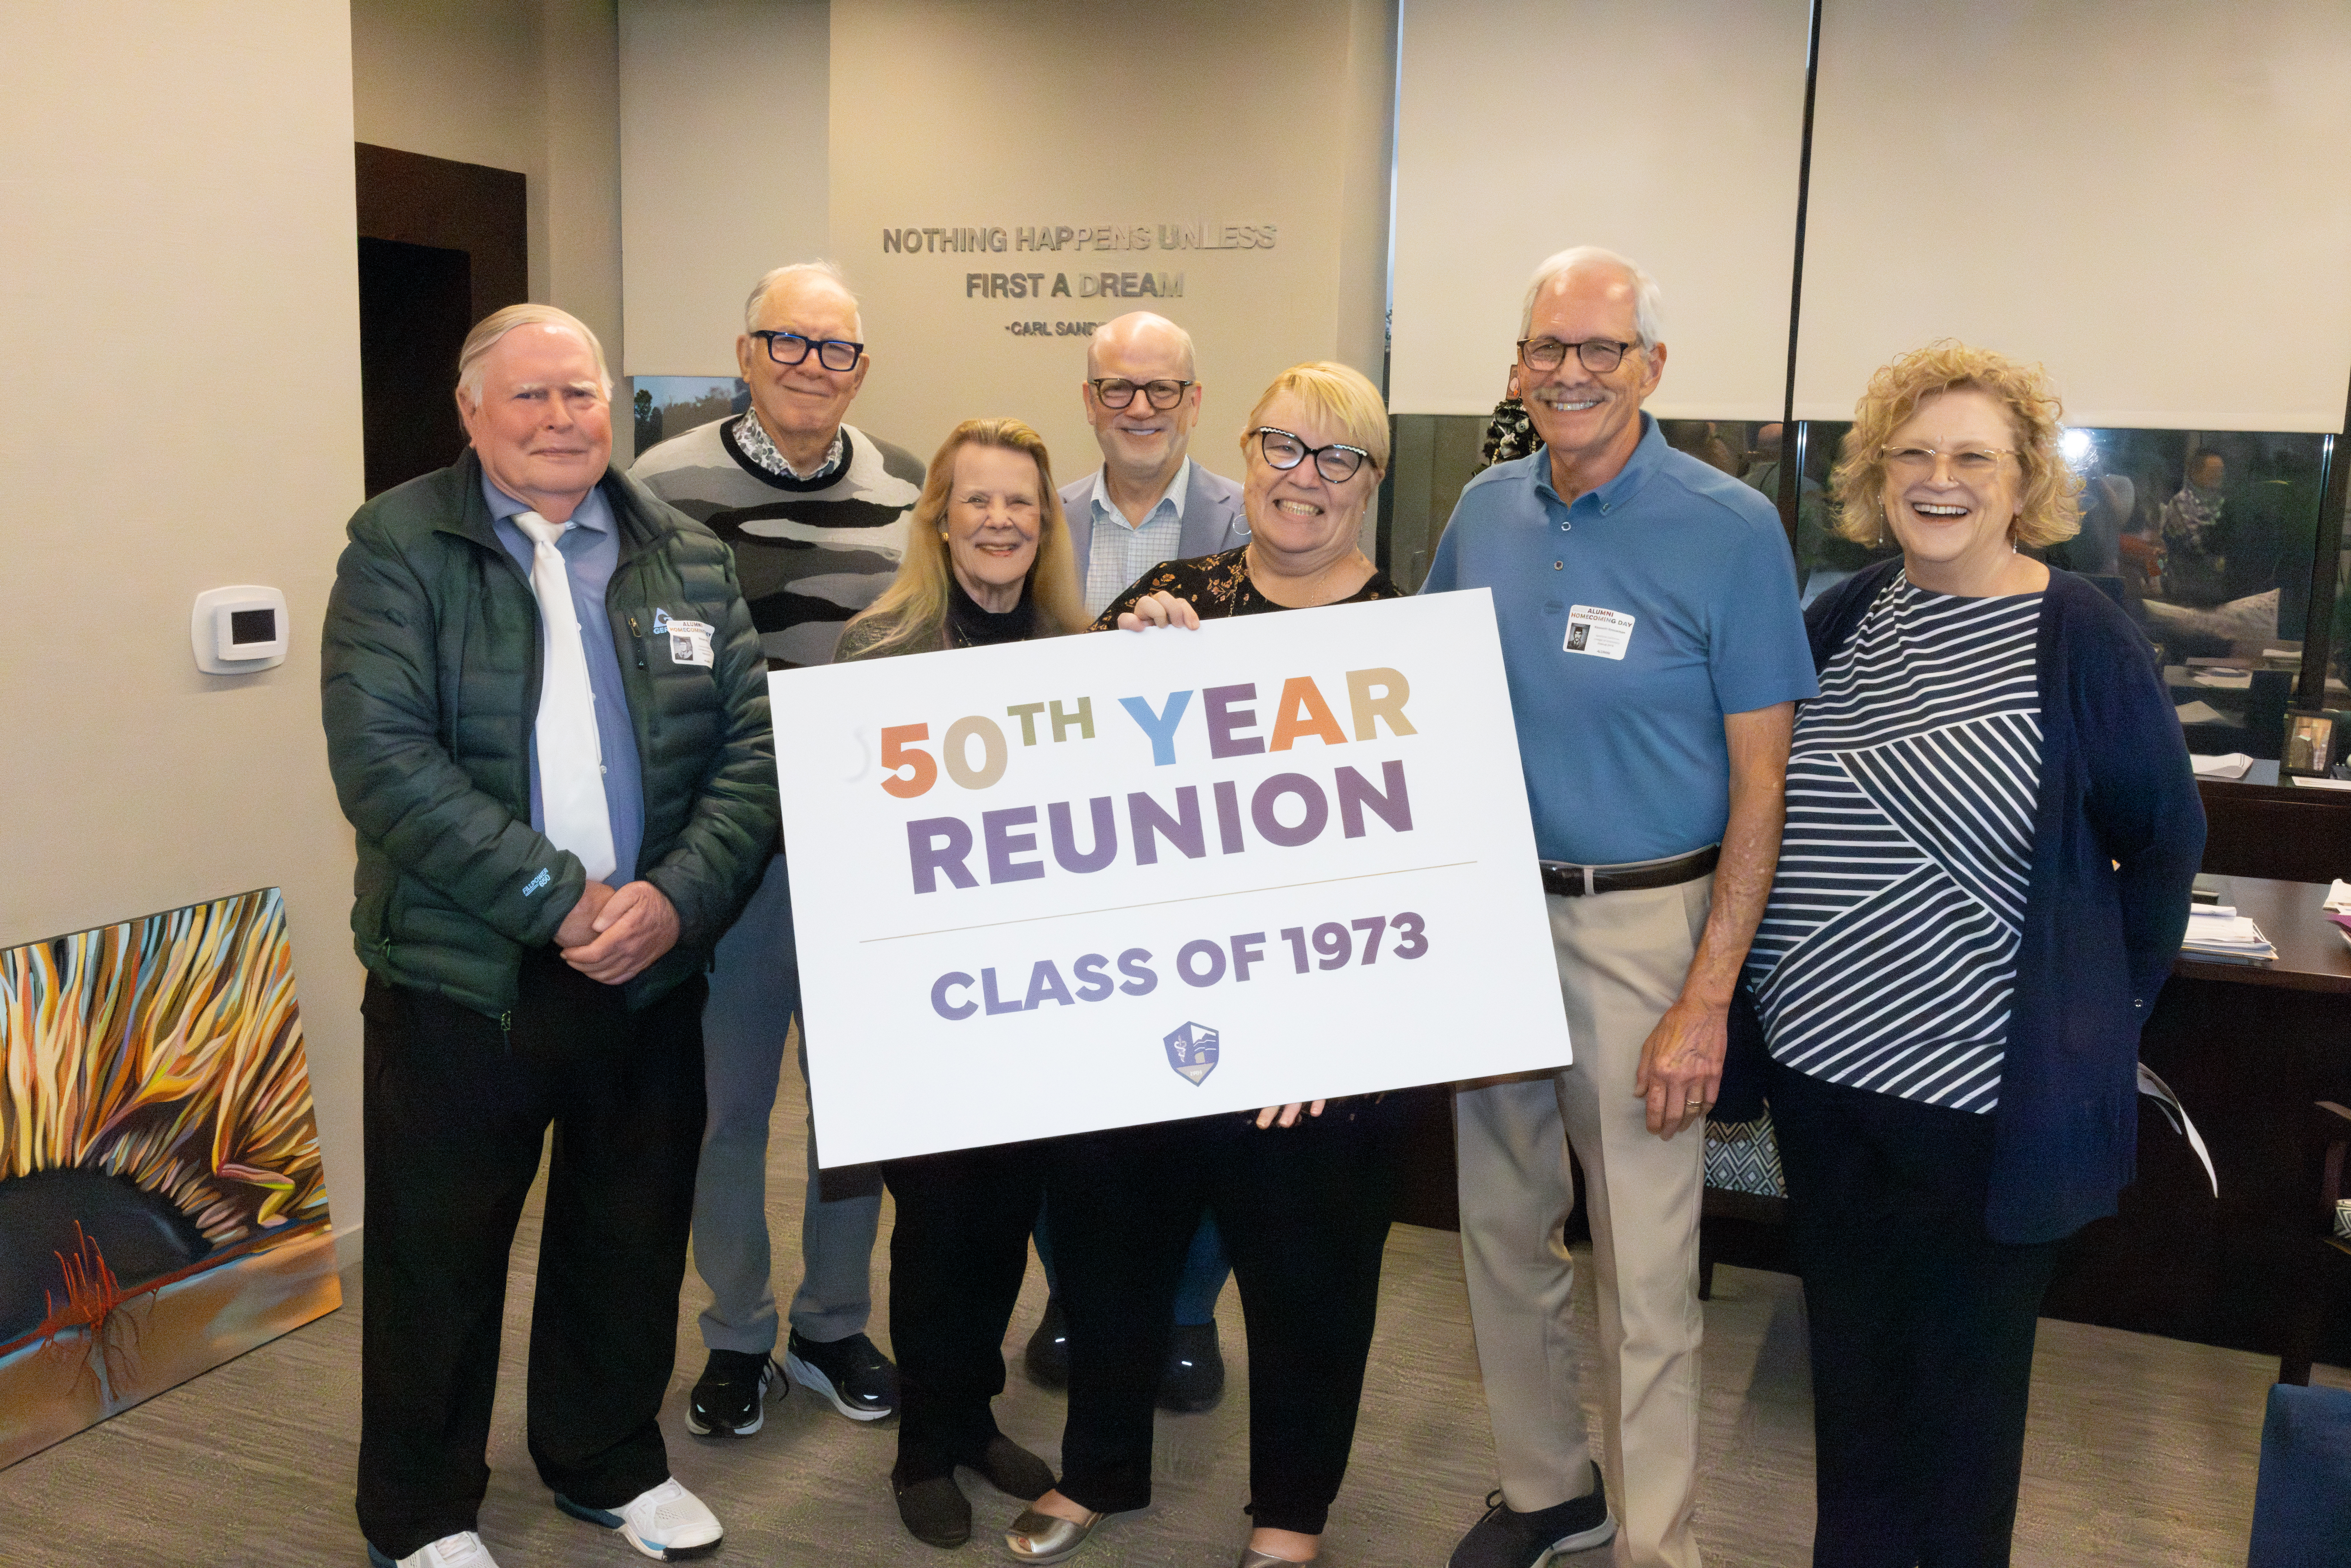 President Schornack poses with Class of 1973 reunion attendees